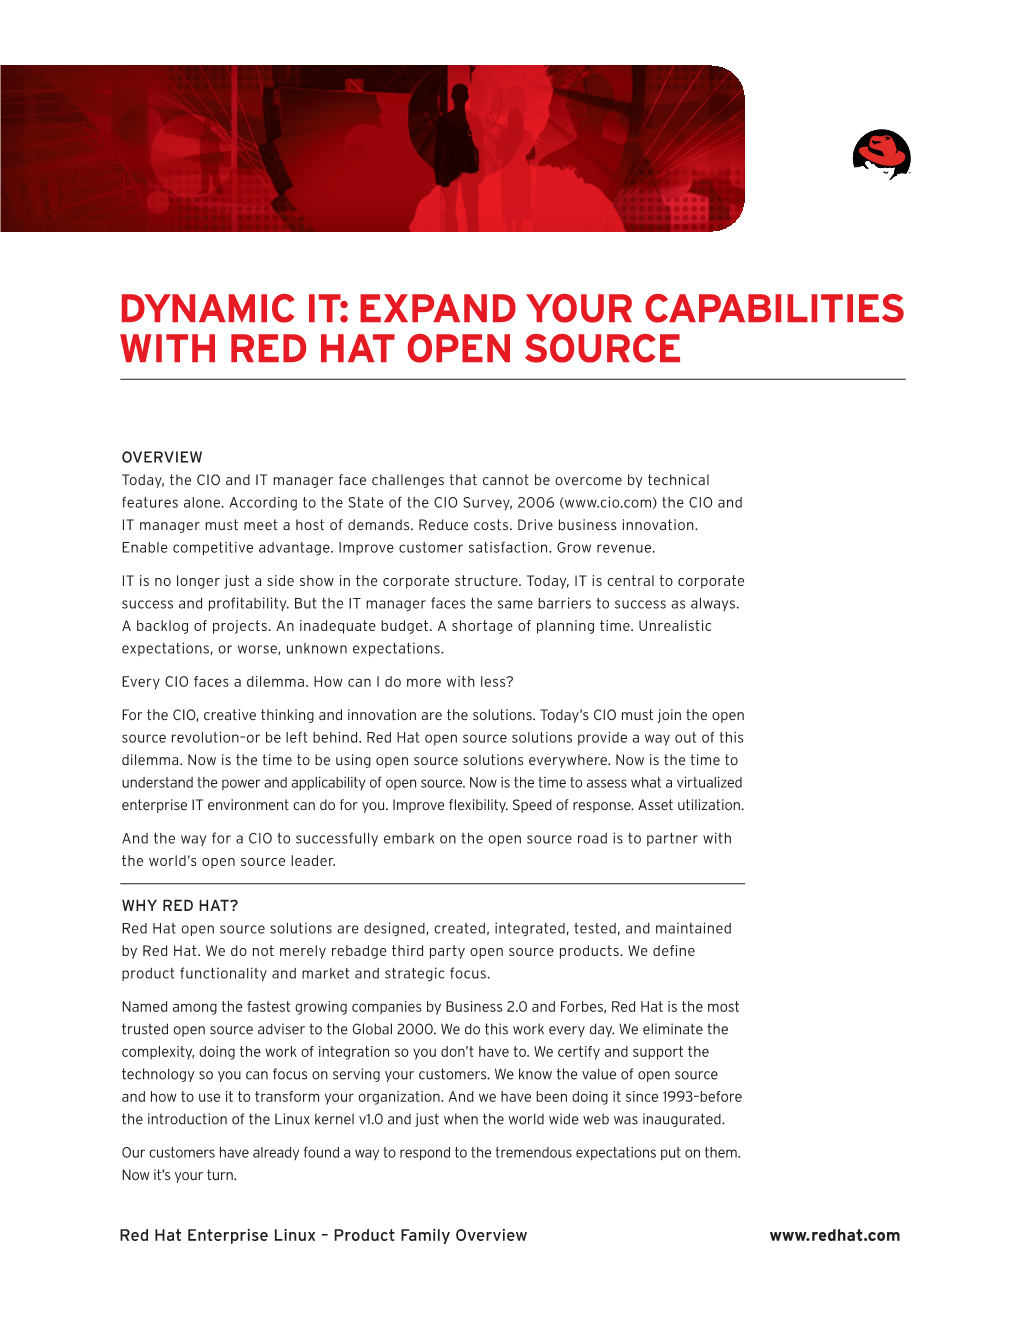 Dynamic IT: Expand Your Capabilities with Red Hat Open Source